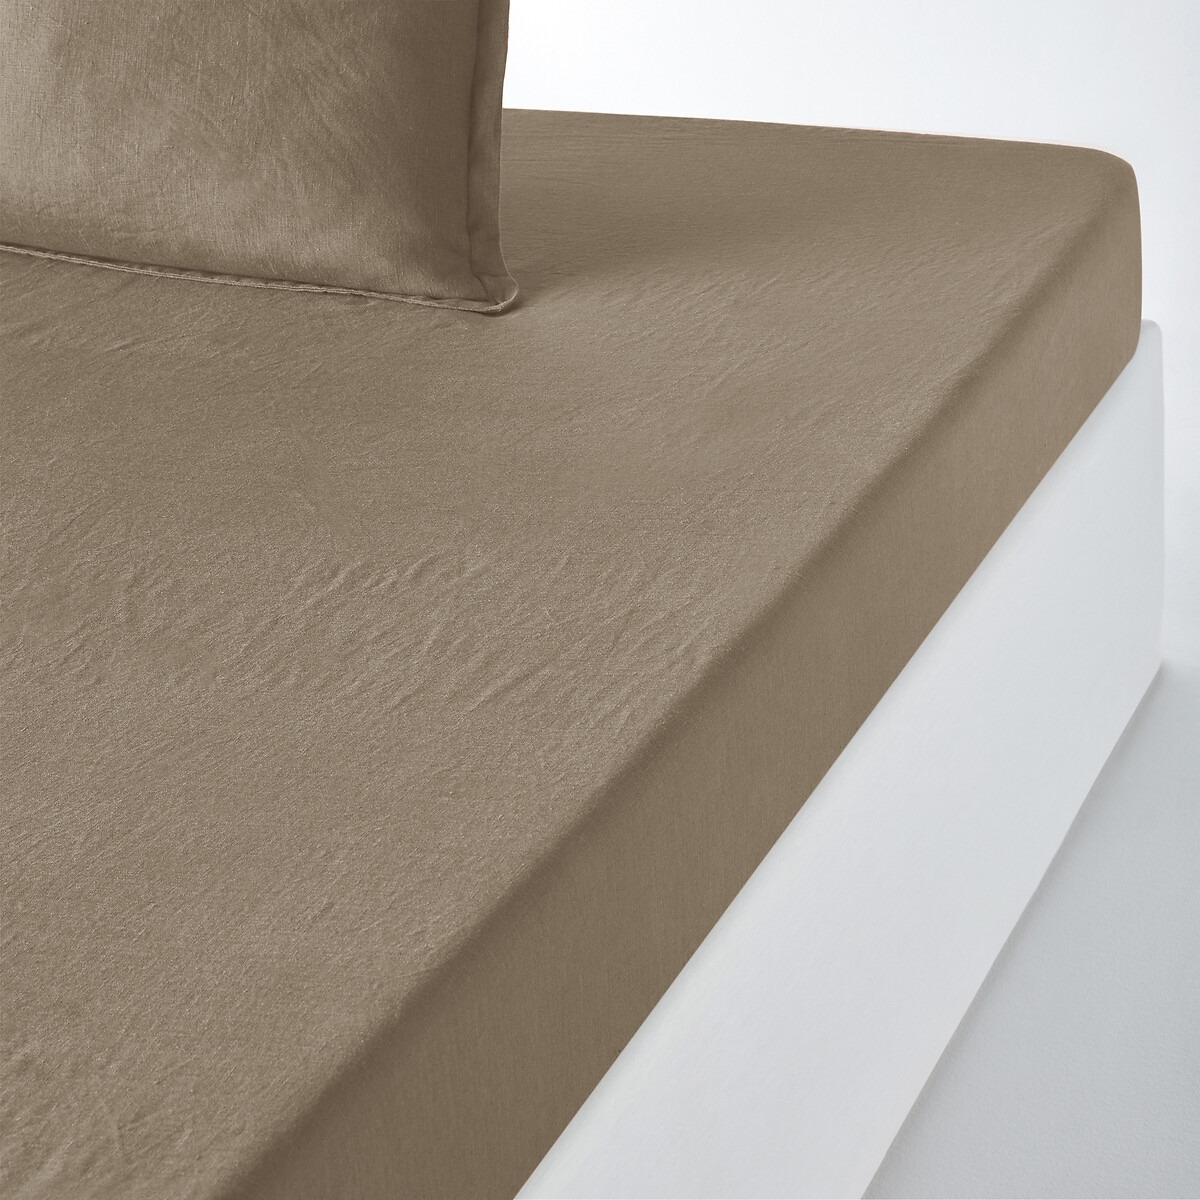 Linot 100% Washed Linen Fitted Sheet for Deep Mattresses (30cm) - image 1